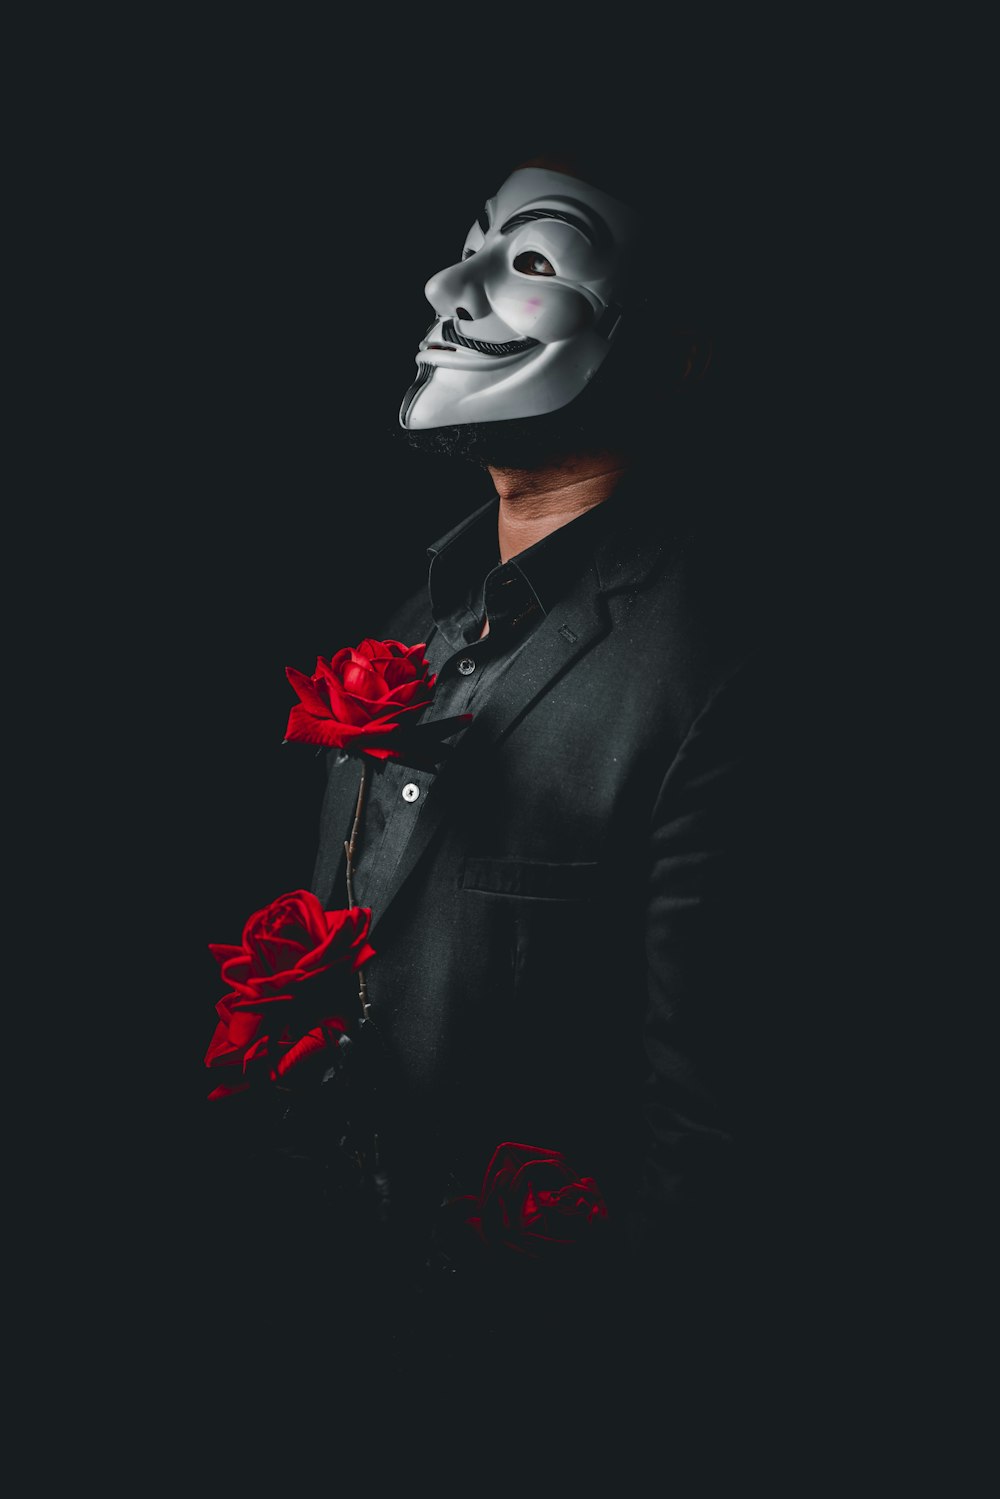 person in black suit with red rose on ear